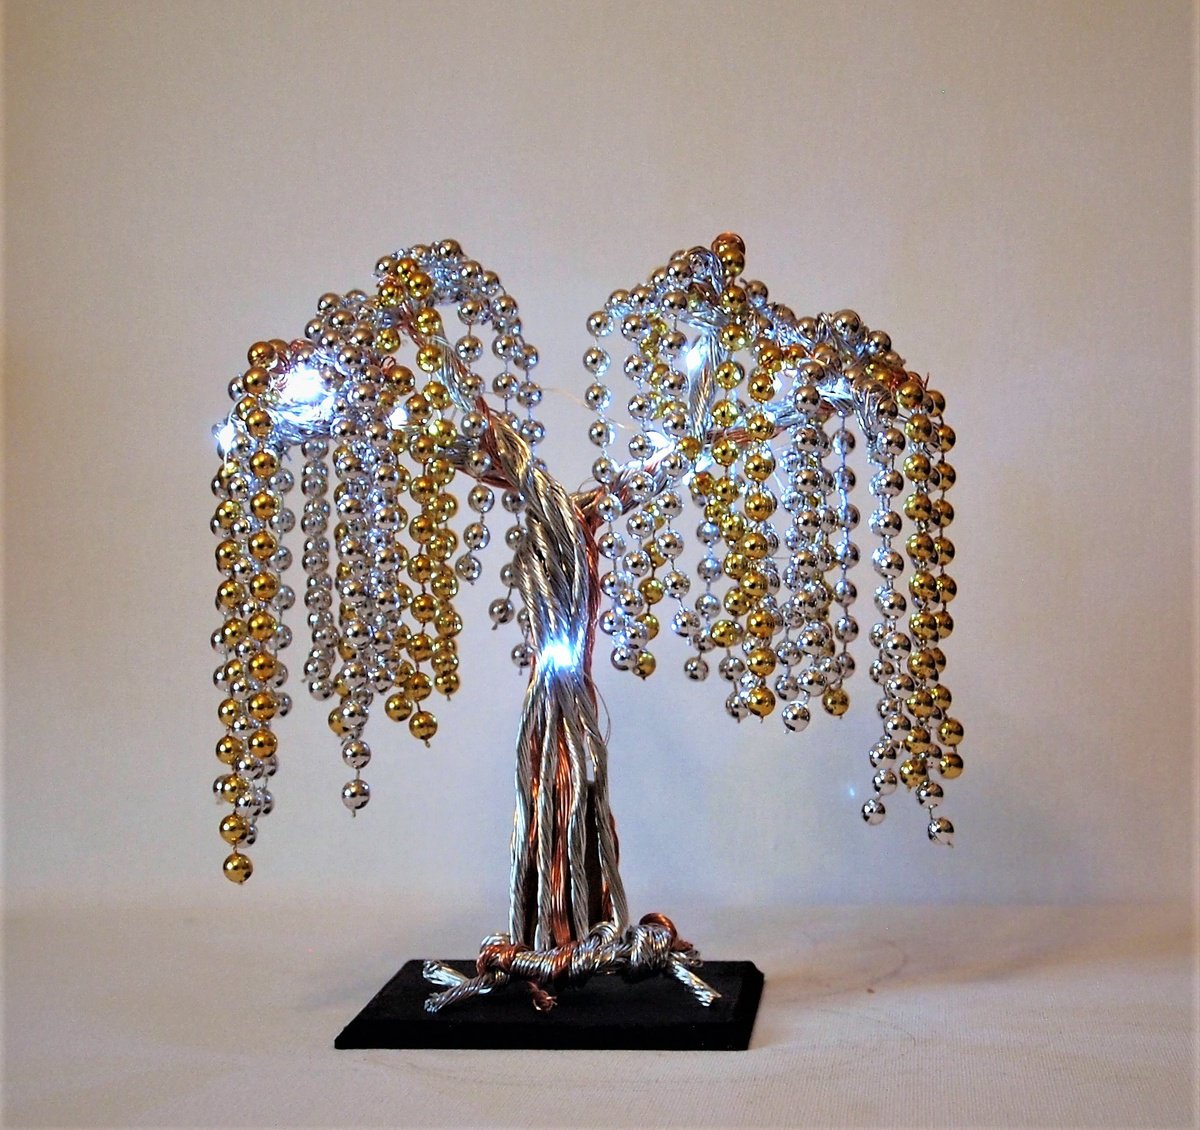 Silver and Copper wire tree sculpture with Beads and Bright white LED lights by Steph Morgan